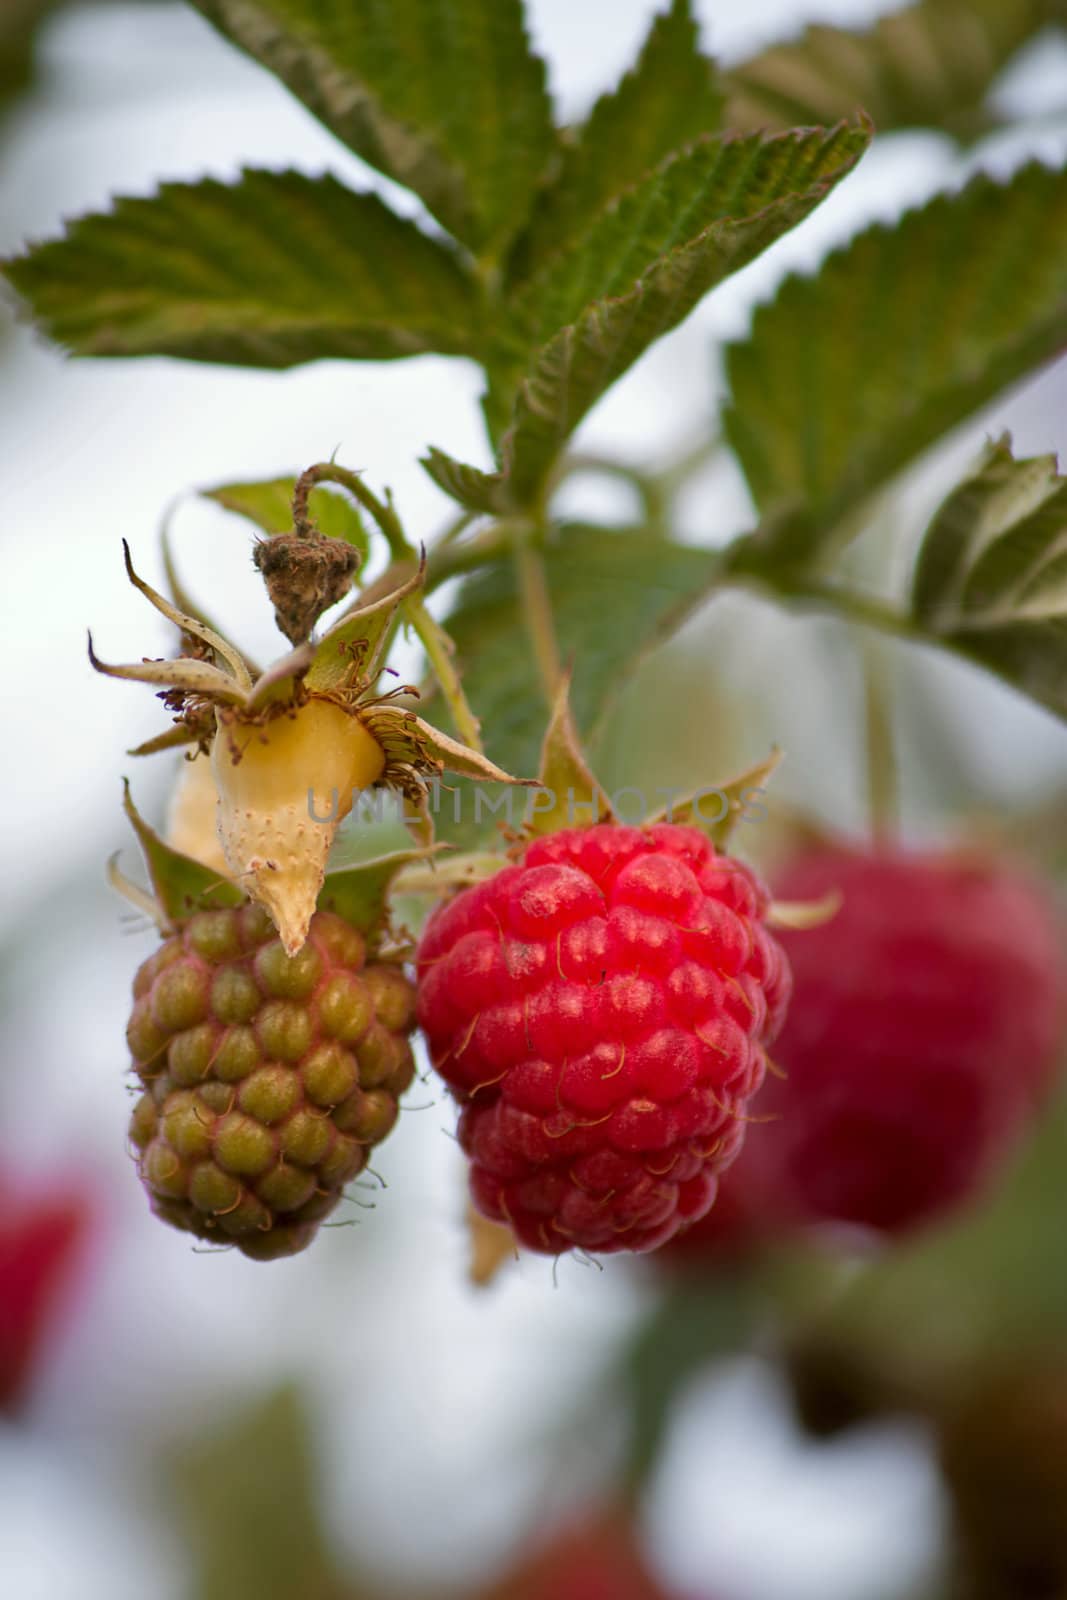 Raspberry close-up of  plant in  garden. Image with shallow depth of field.